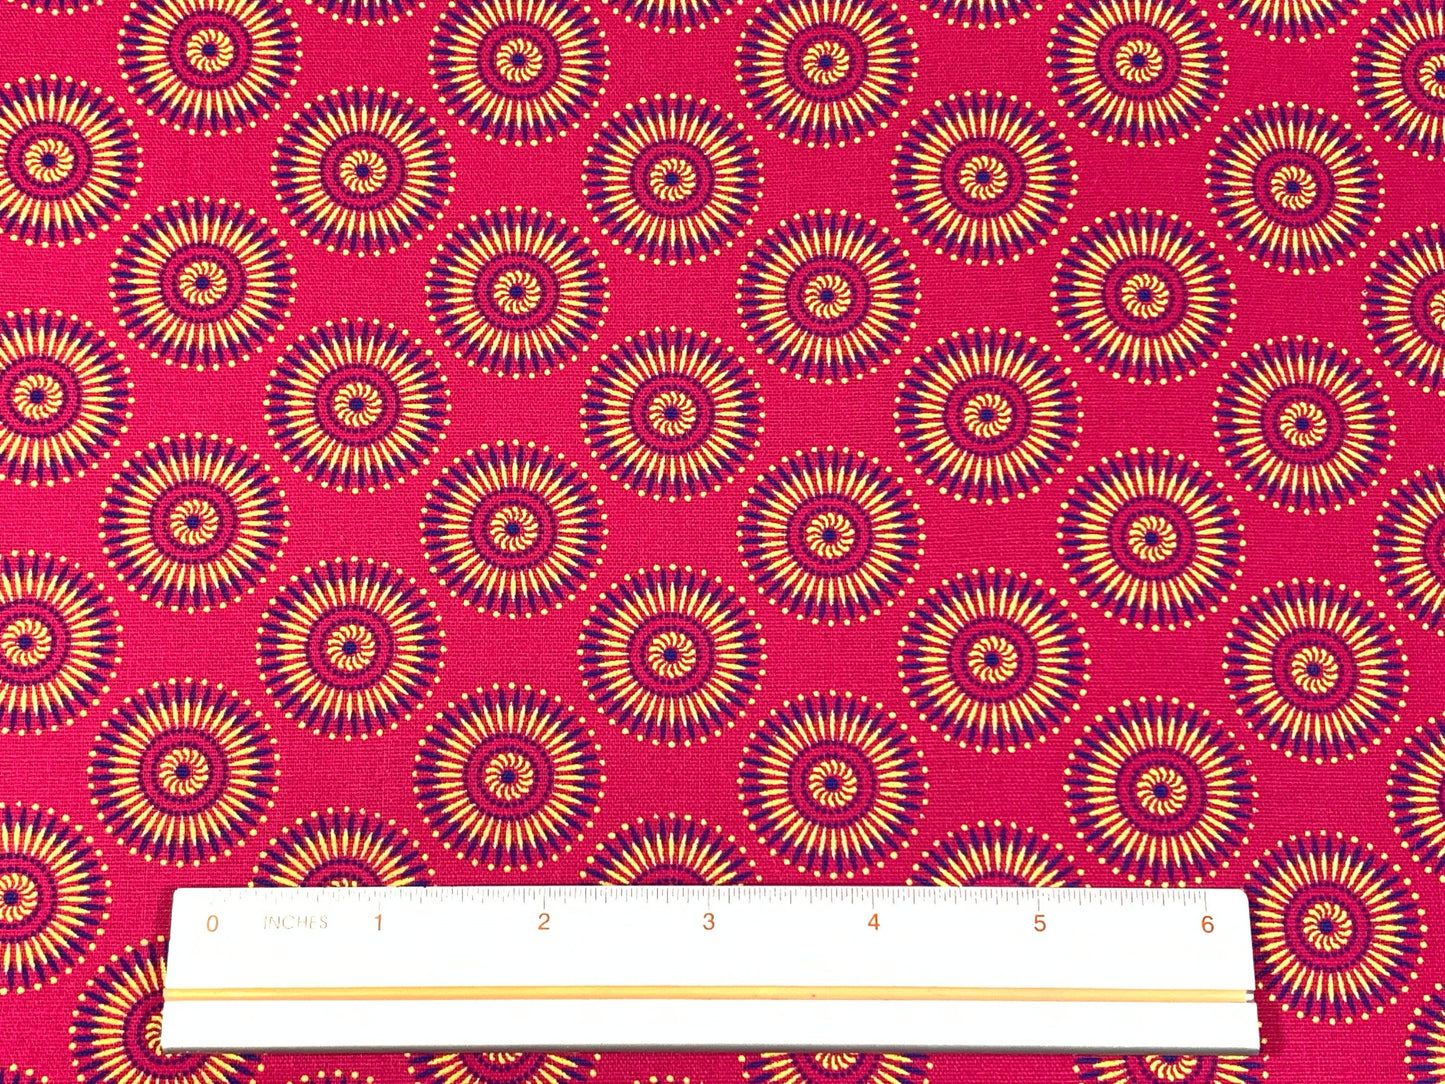 South African Shweshwe Fabric by the YARD. DaGama 3 Cats Pink, Royal Blue, Yellow Little Radiant Daisies. Cotton for Quilts, Apparel, Decor